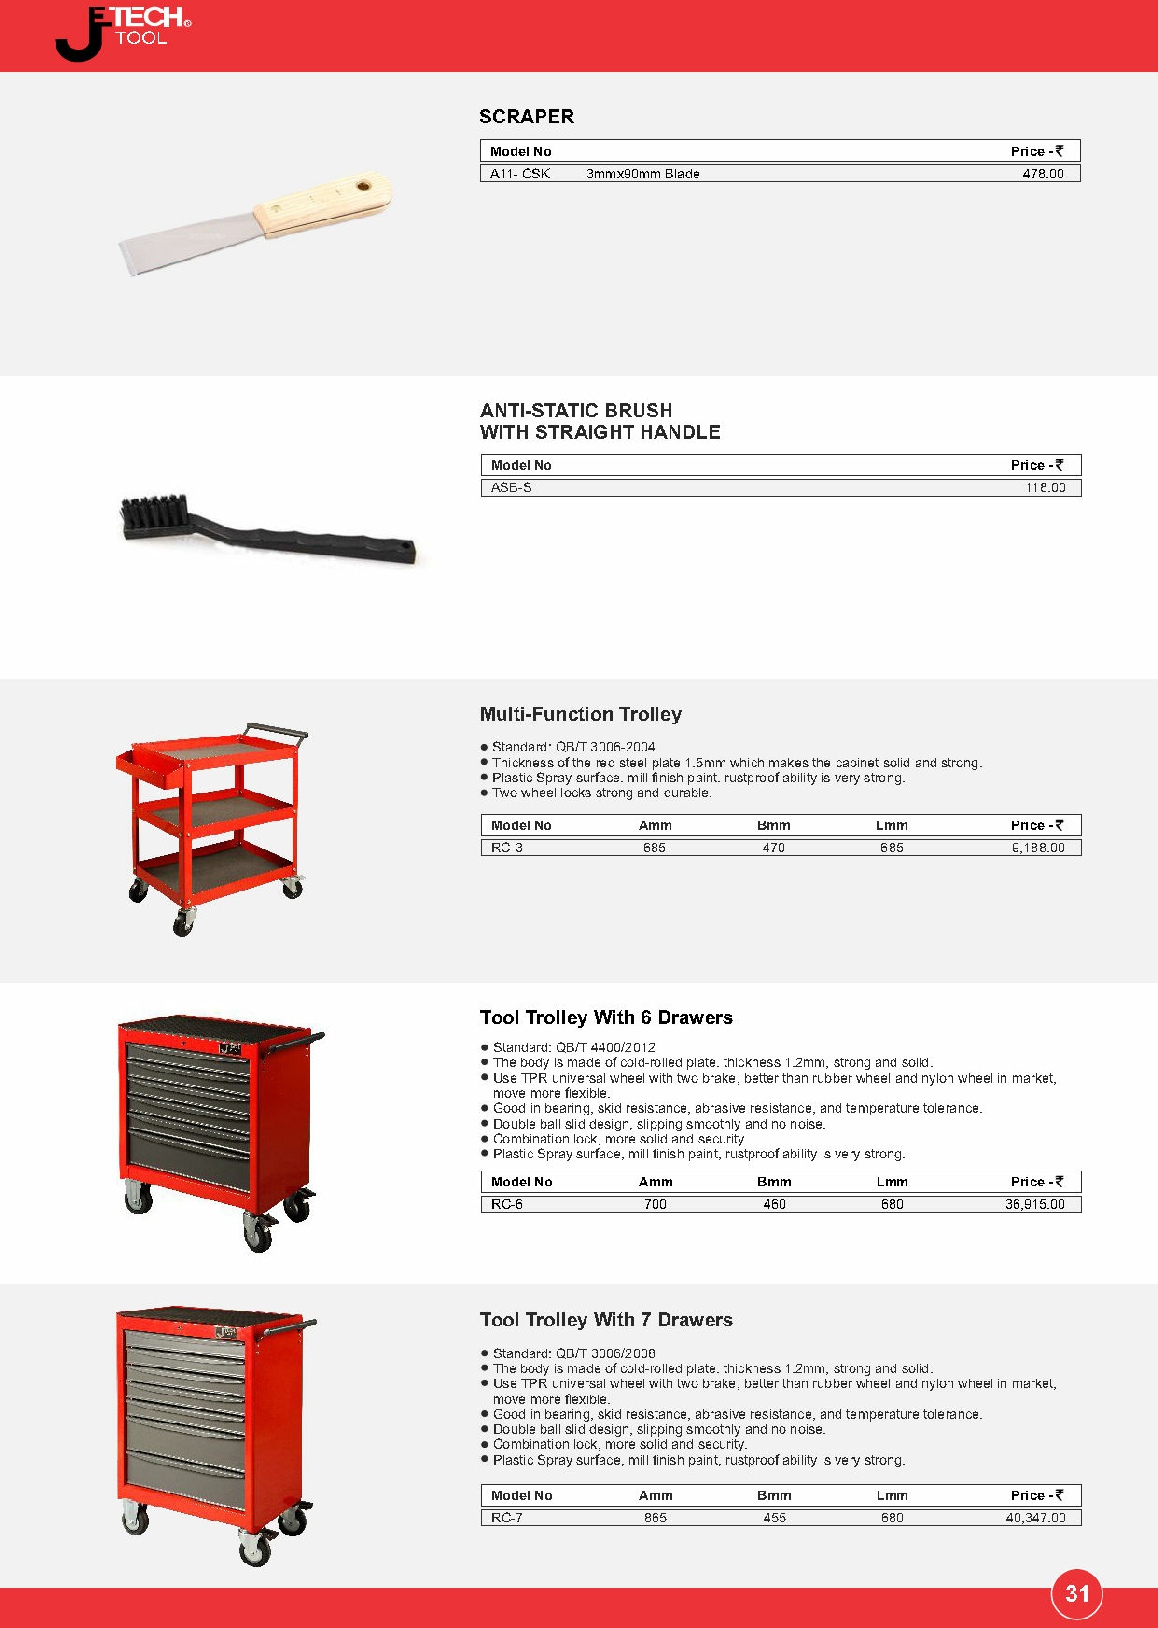 scraper,antistatic brush,multifunction trolley,tool trolley with drawers, jetech tools chennai